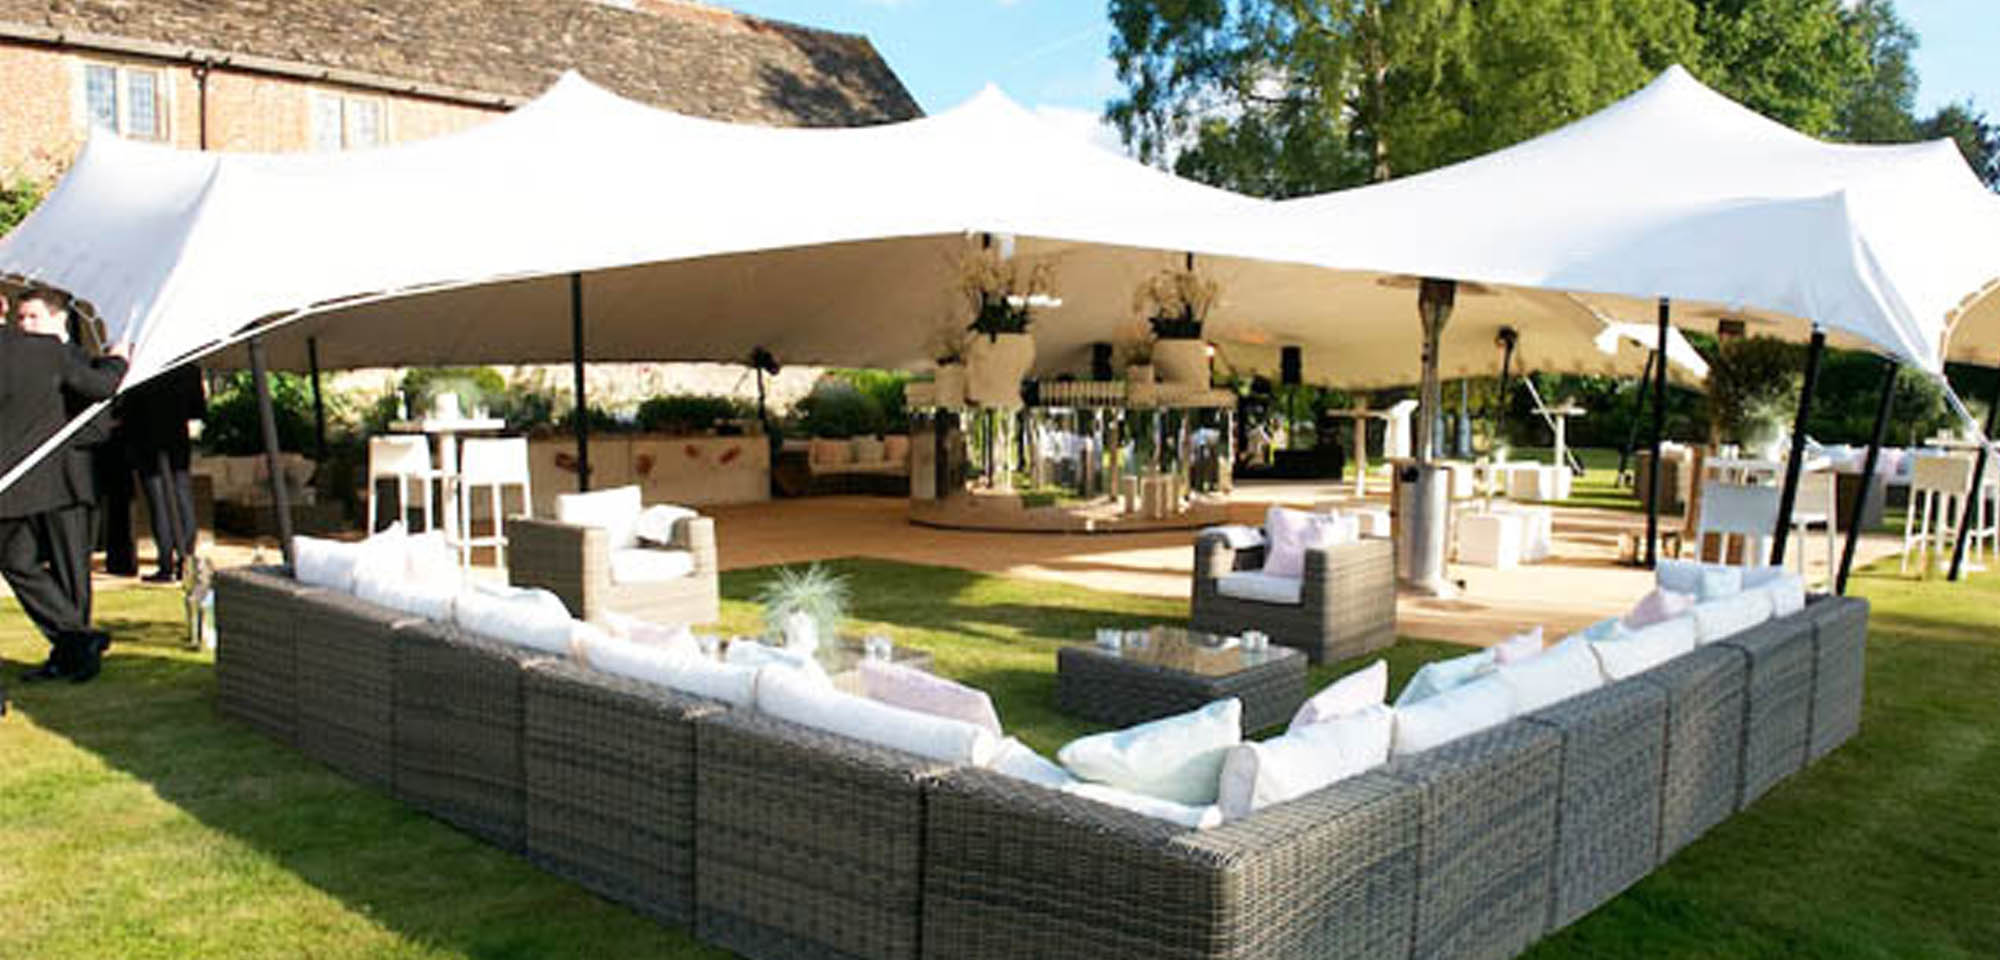 Large White Stretch Tent in Garden with outdoor furniture